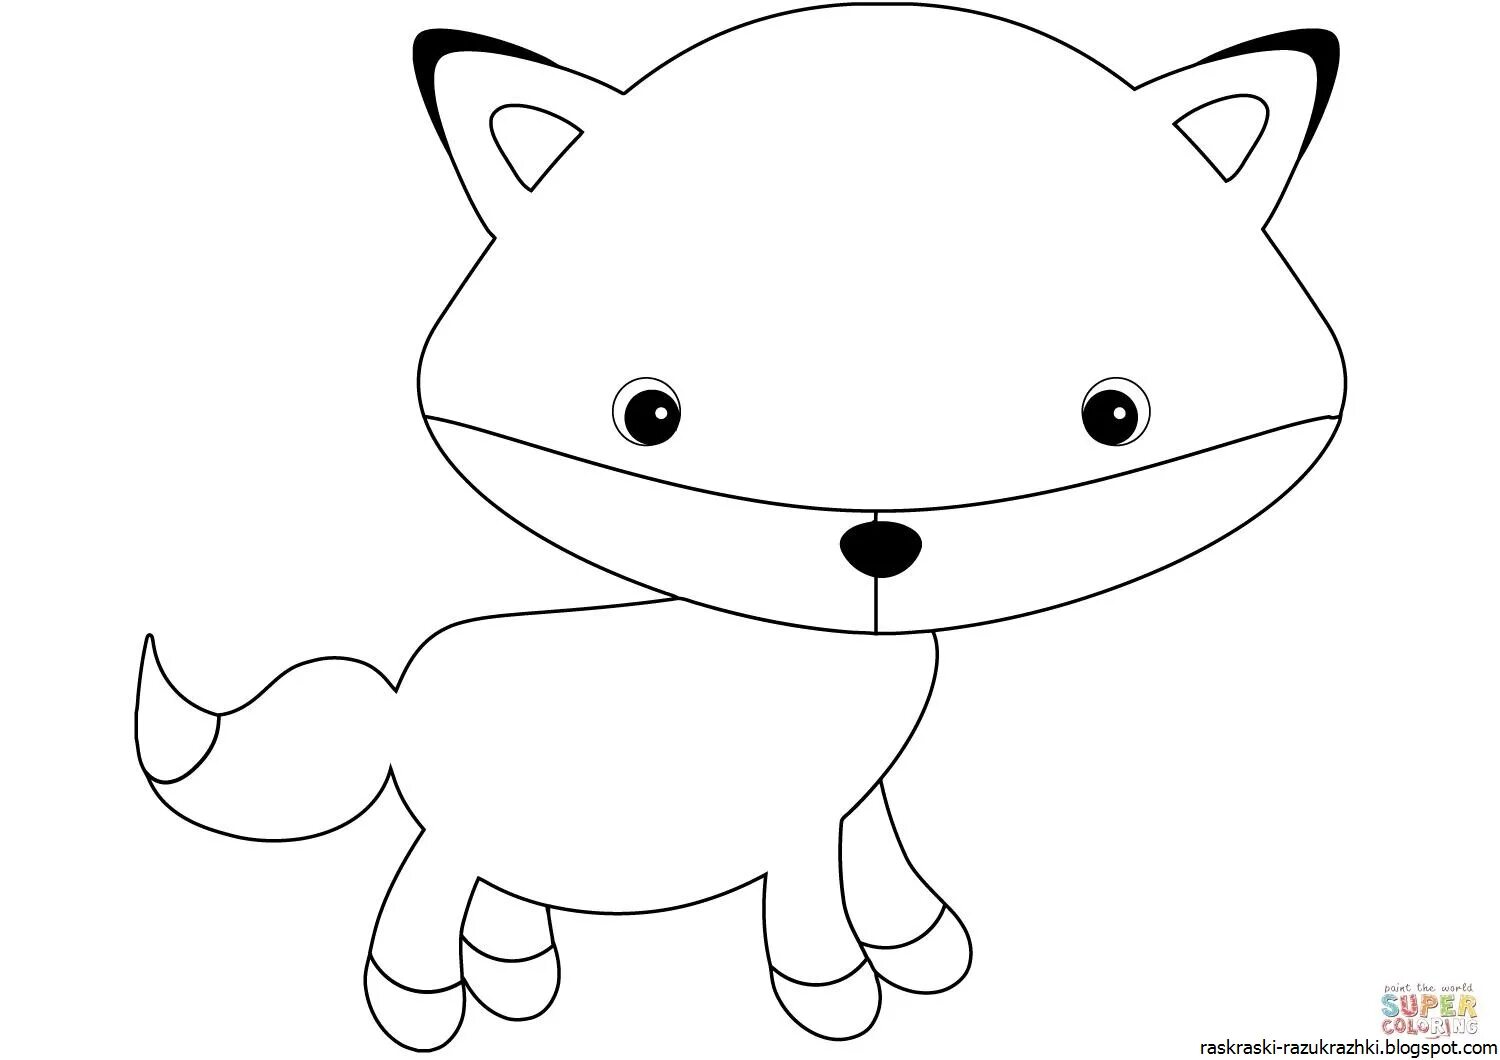 Coloring book cute fox for children 3-4 years old